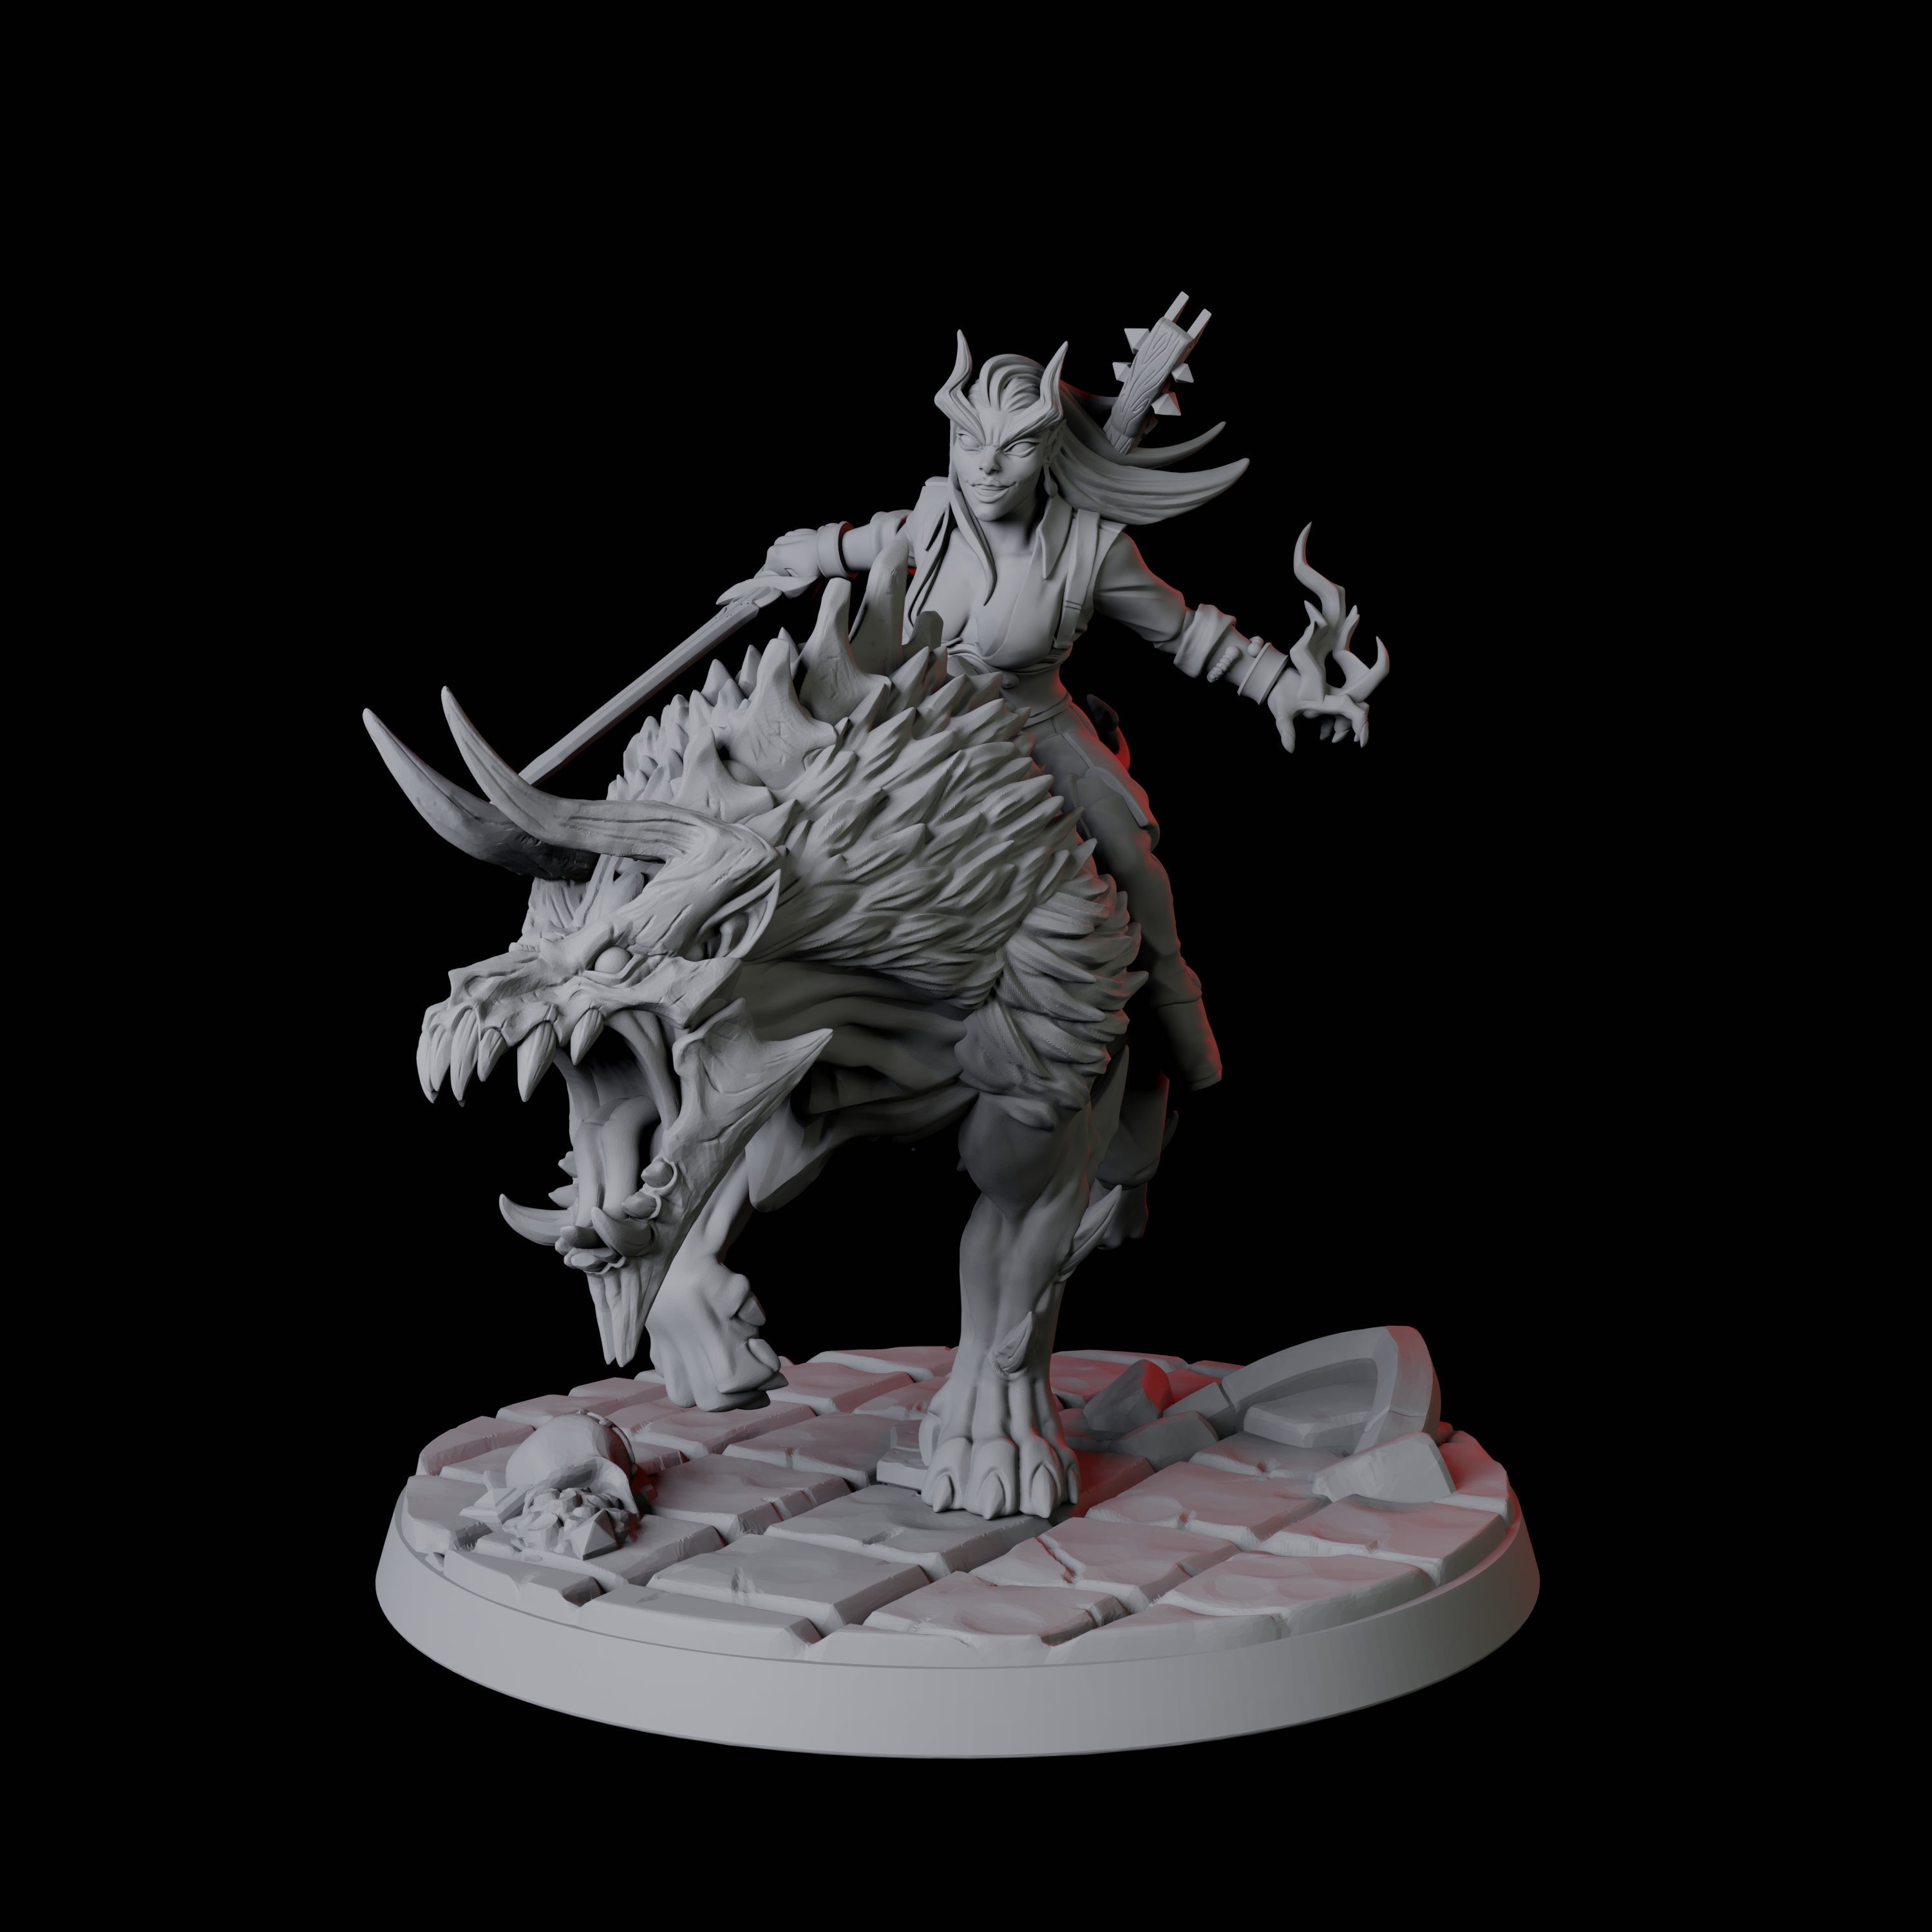 Four Tiefling Tricksters on Hell Hounds Miniature for Dungeons and Dragons, Pathfinder or other TTRPGs